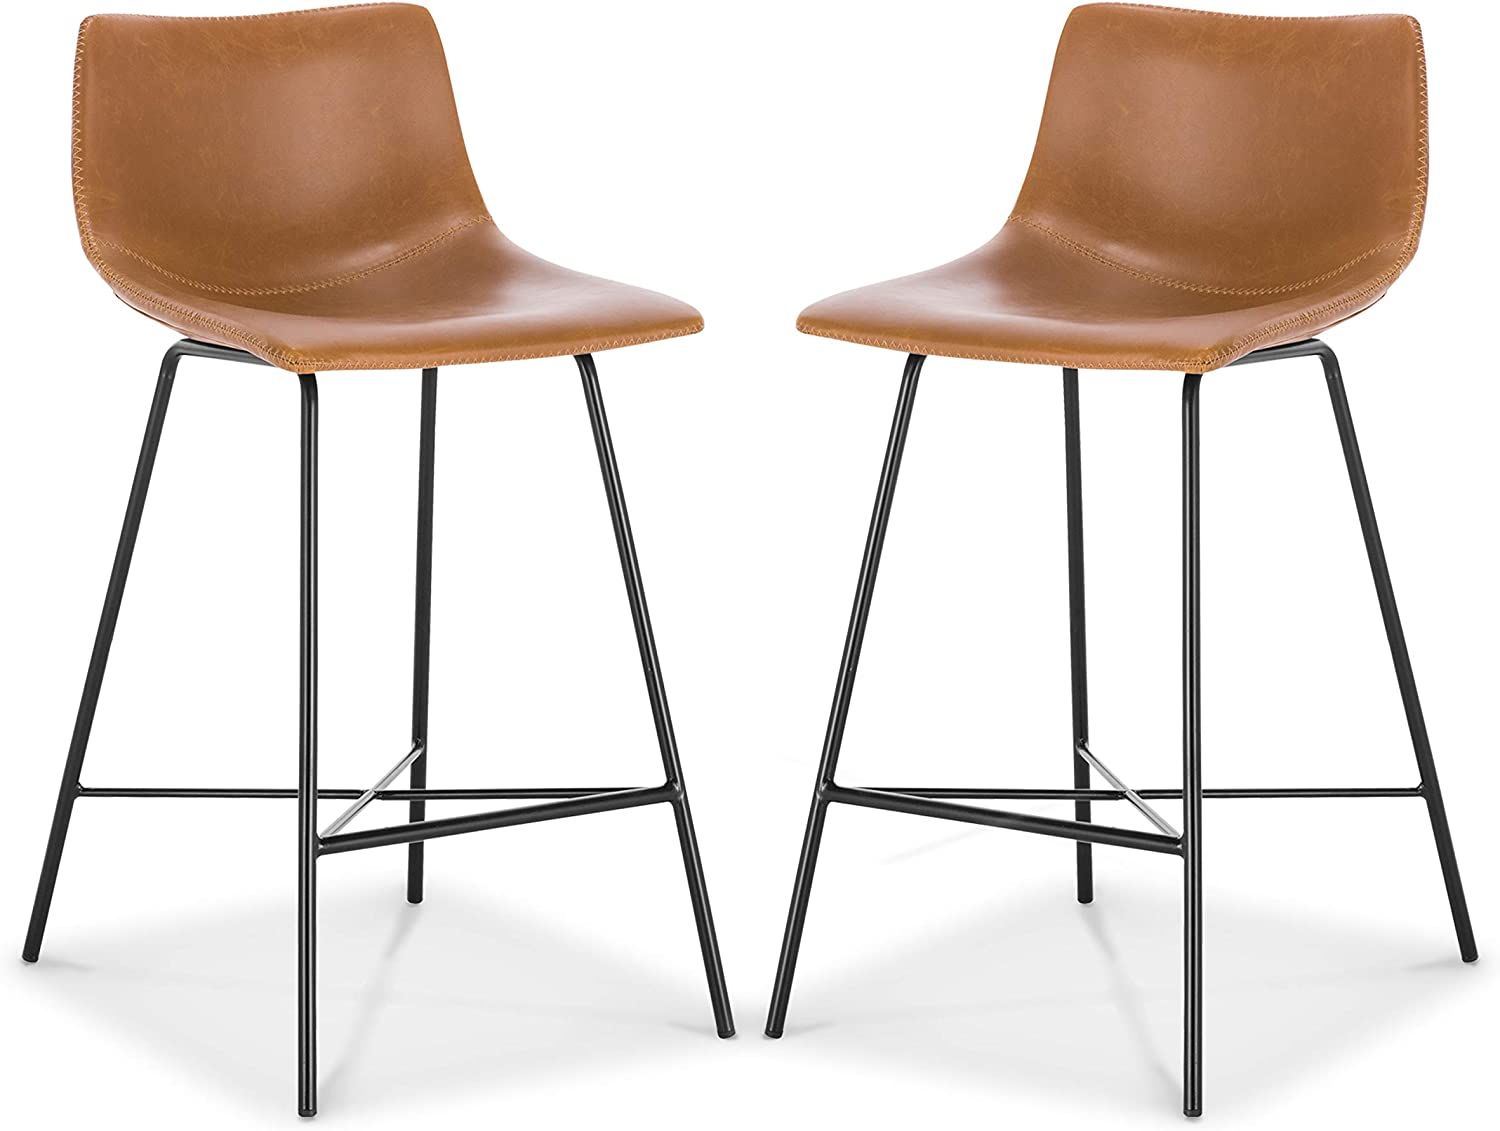 POLY & BARK Paxton 24” Counter Stool in Tan, Set of 2 | Amazon (US)